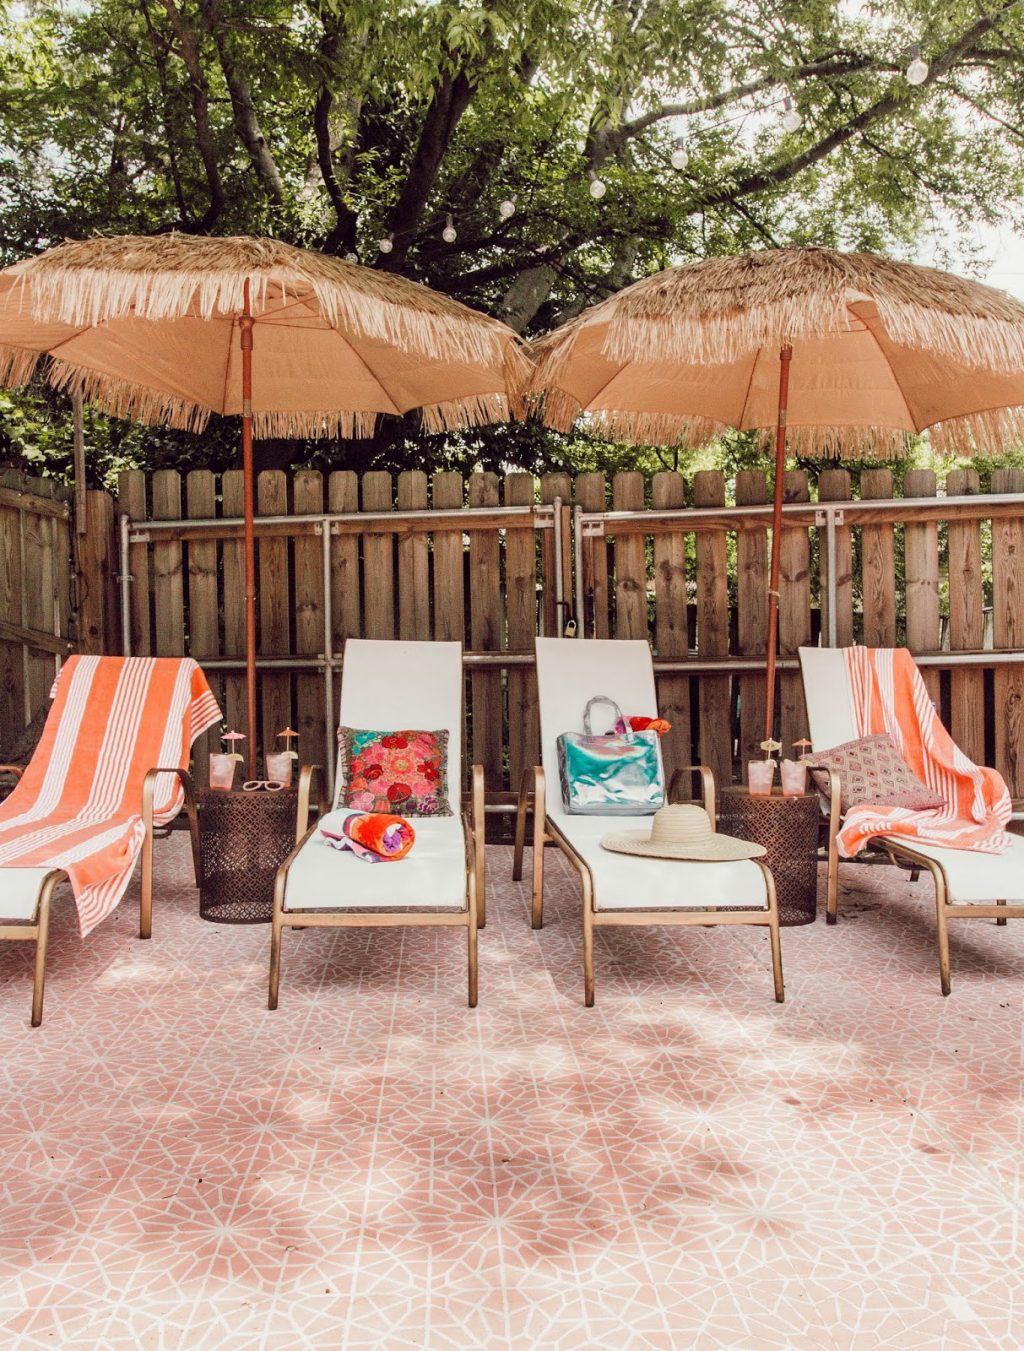 15 Gorgeous Outdoor DIY Decor Projects for Summer 